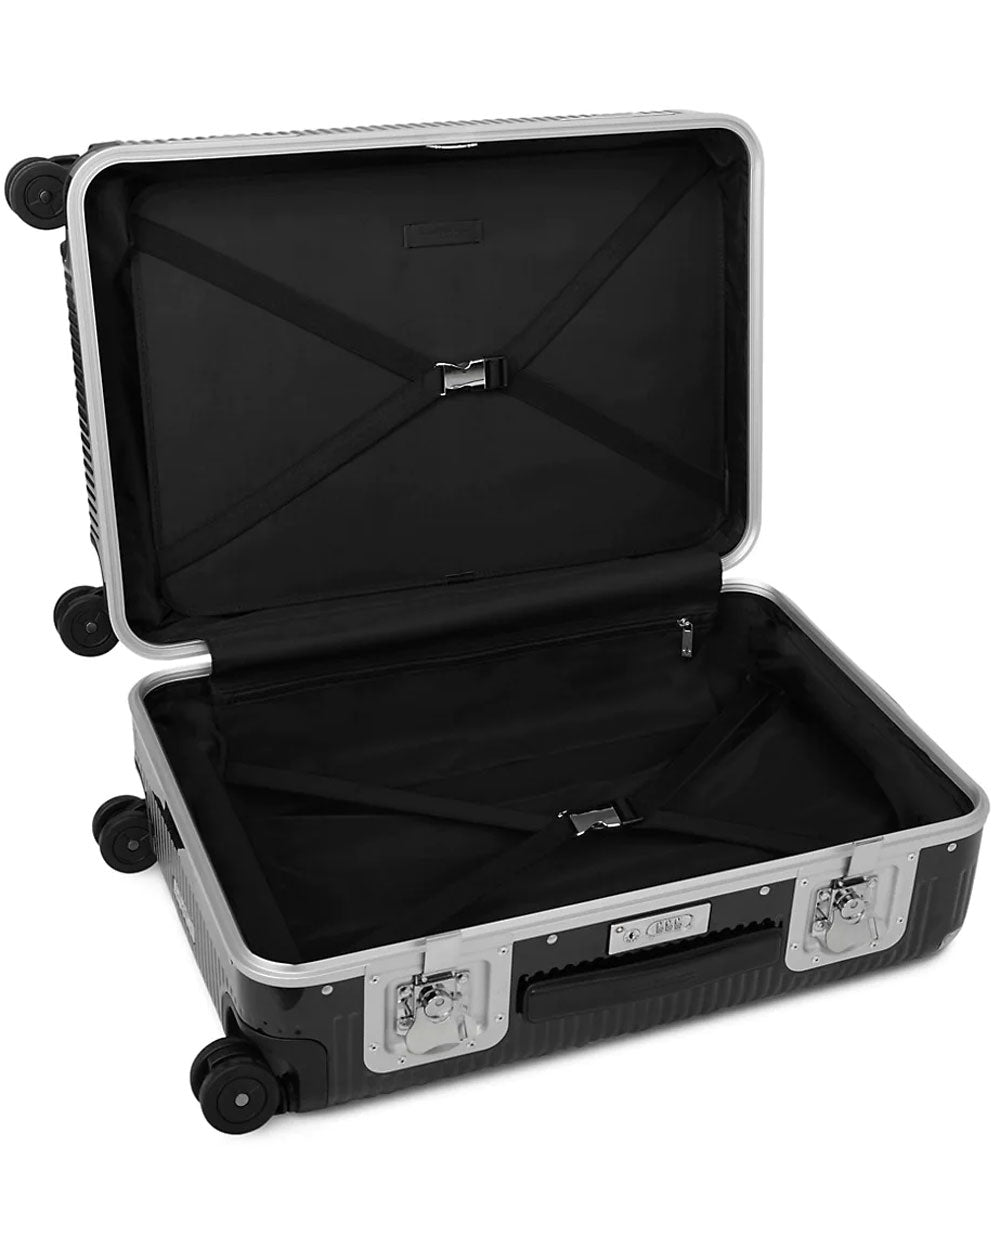 76 Bank Spinner Suitcase in Licorice Black